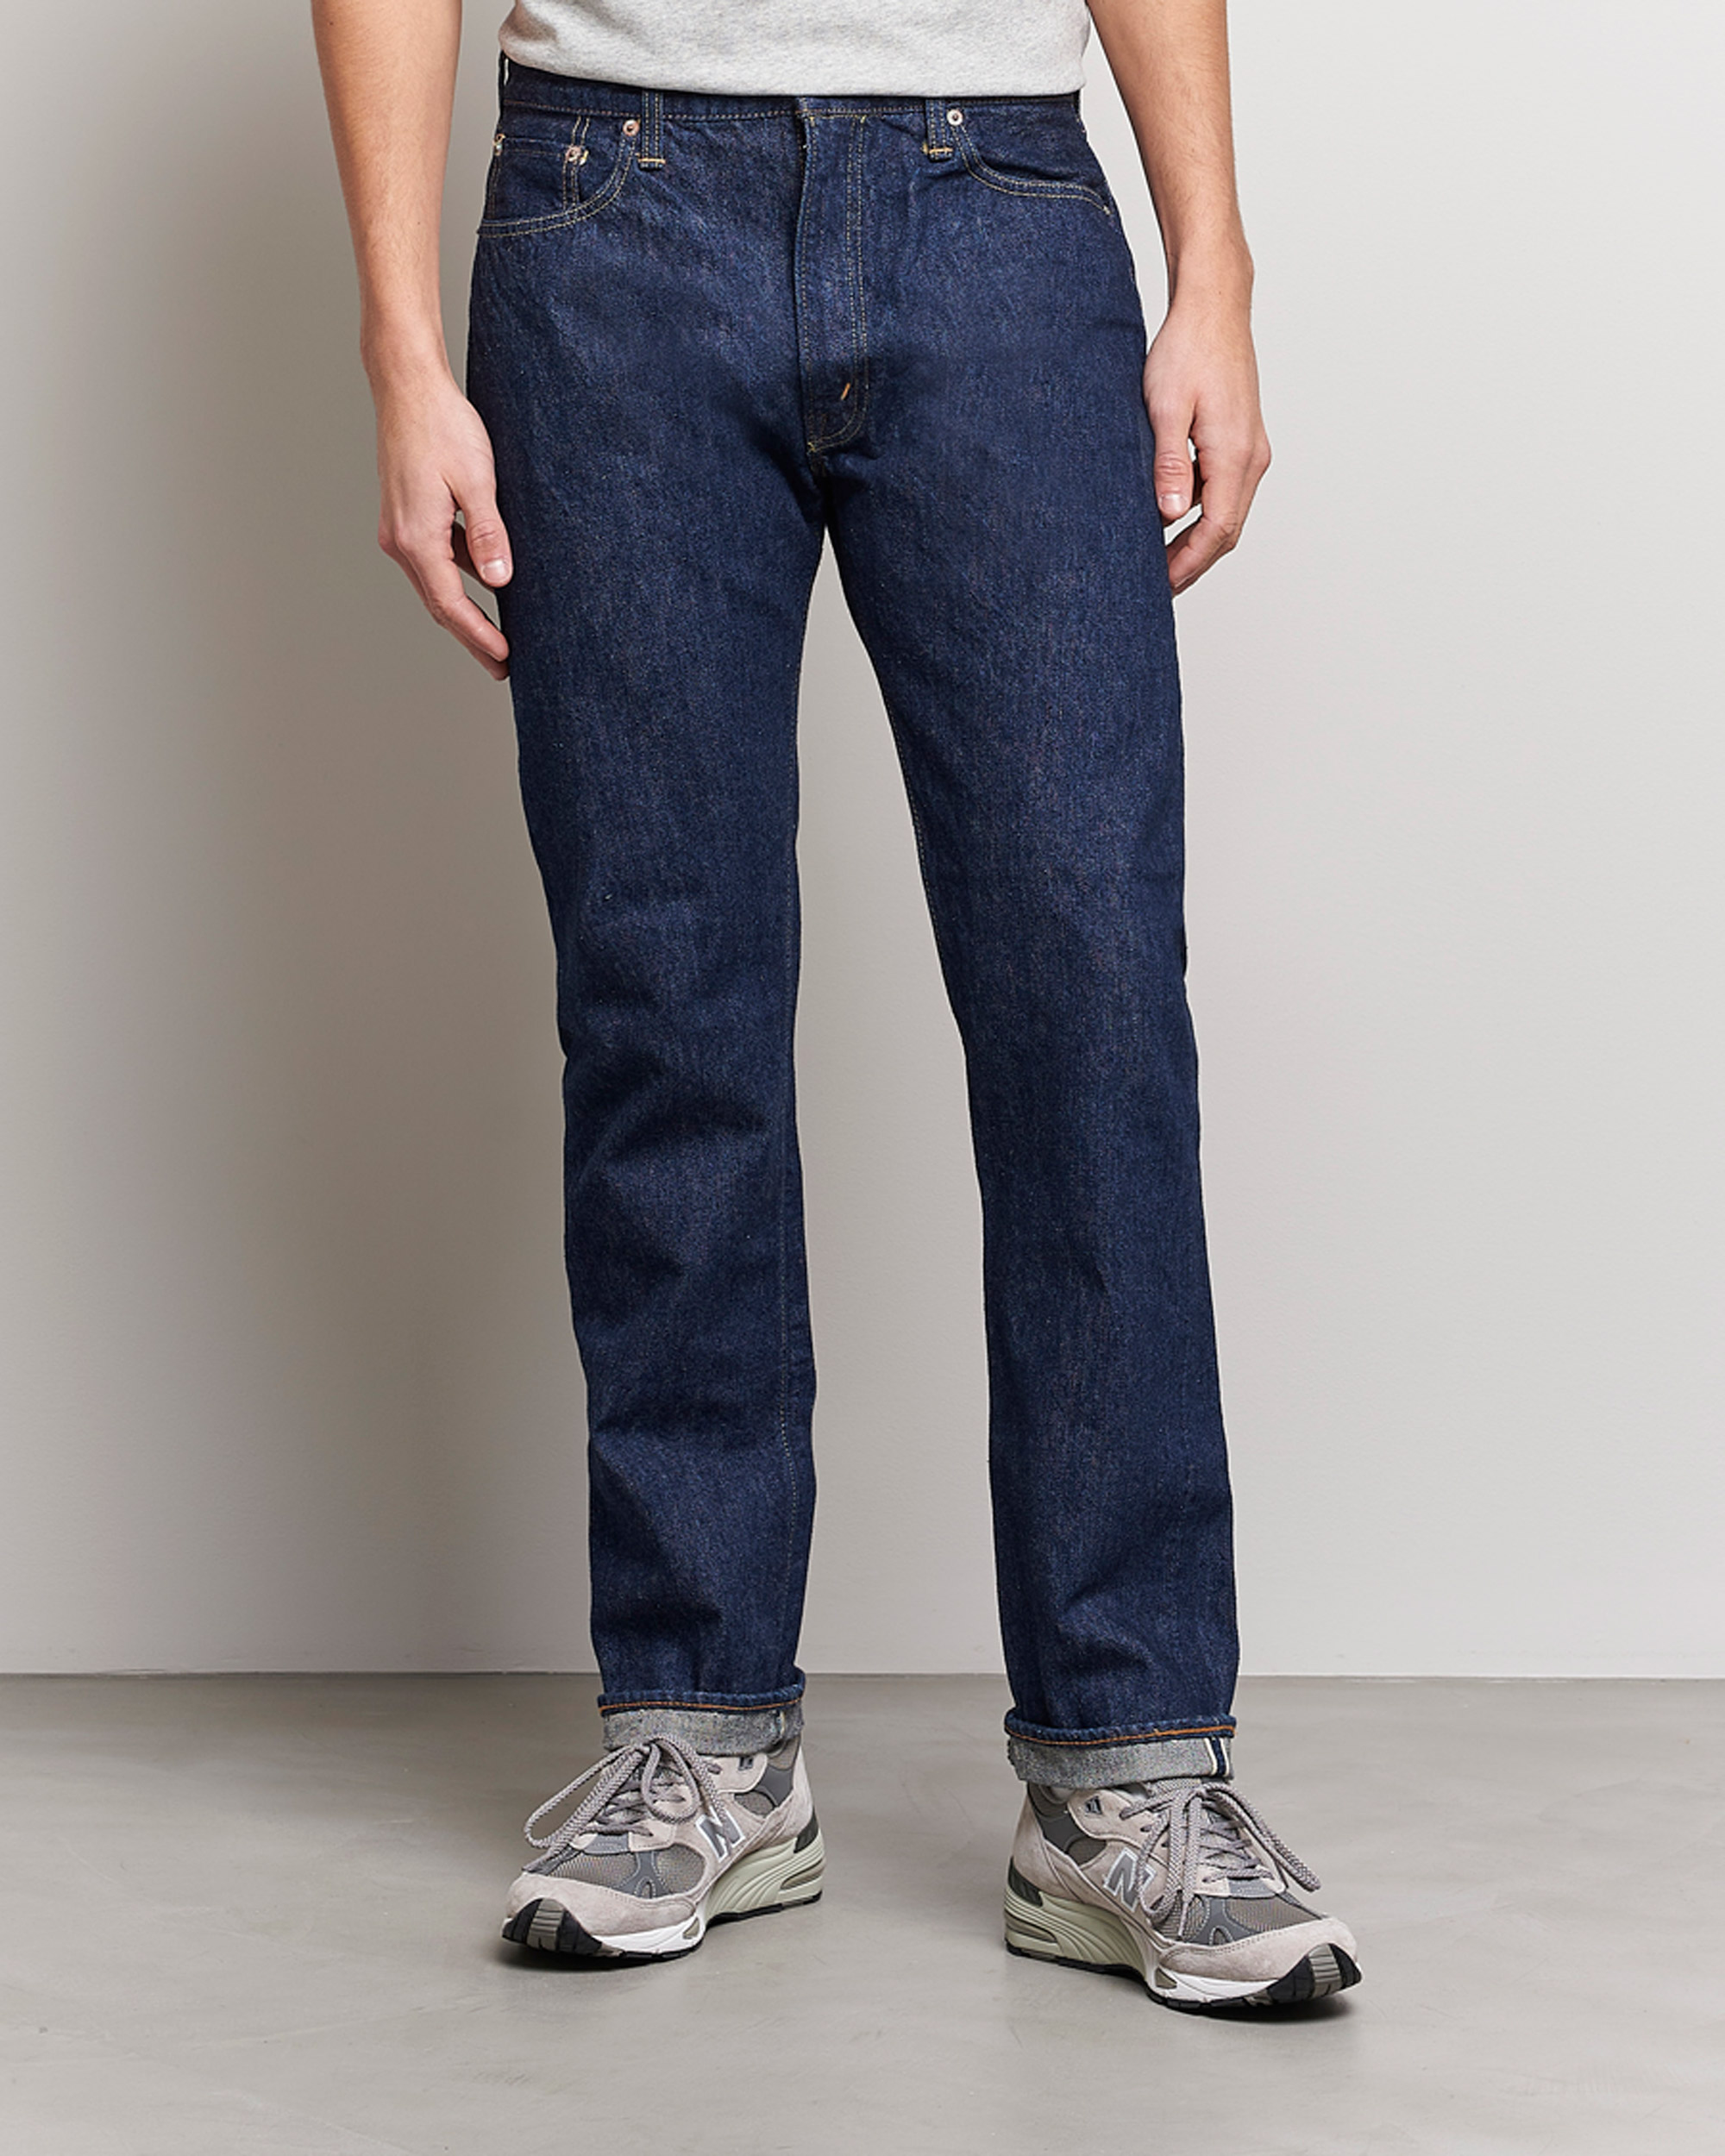 Homme | Jeans Bleus | orSlow | Tapered Fit 107 Selvedge Jeans One Wash